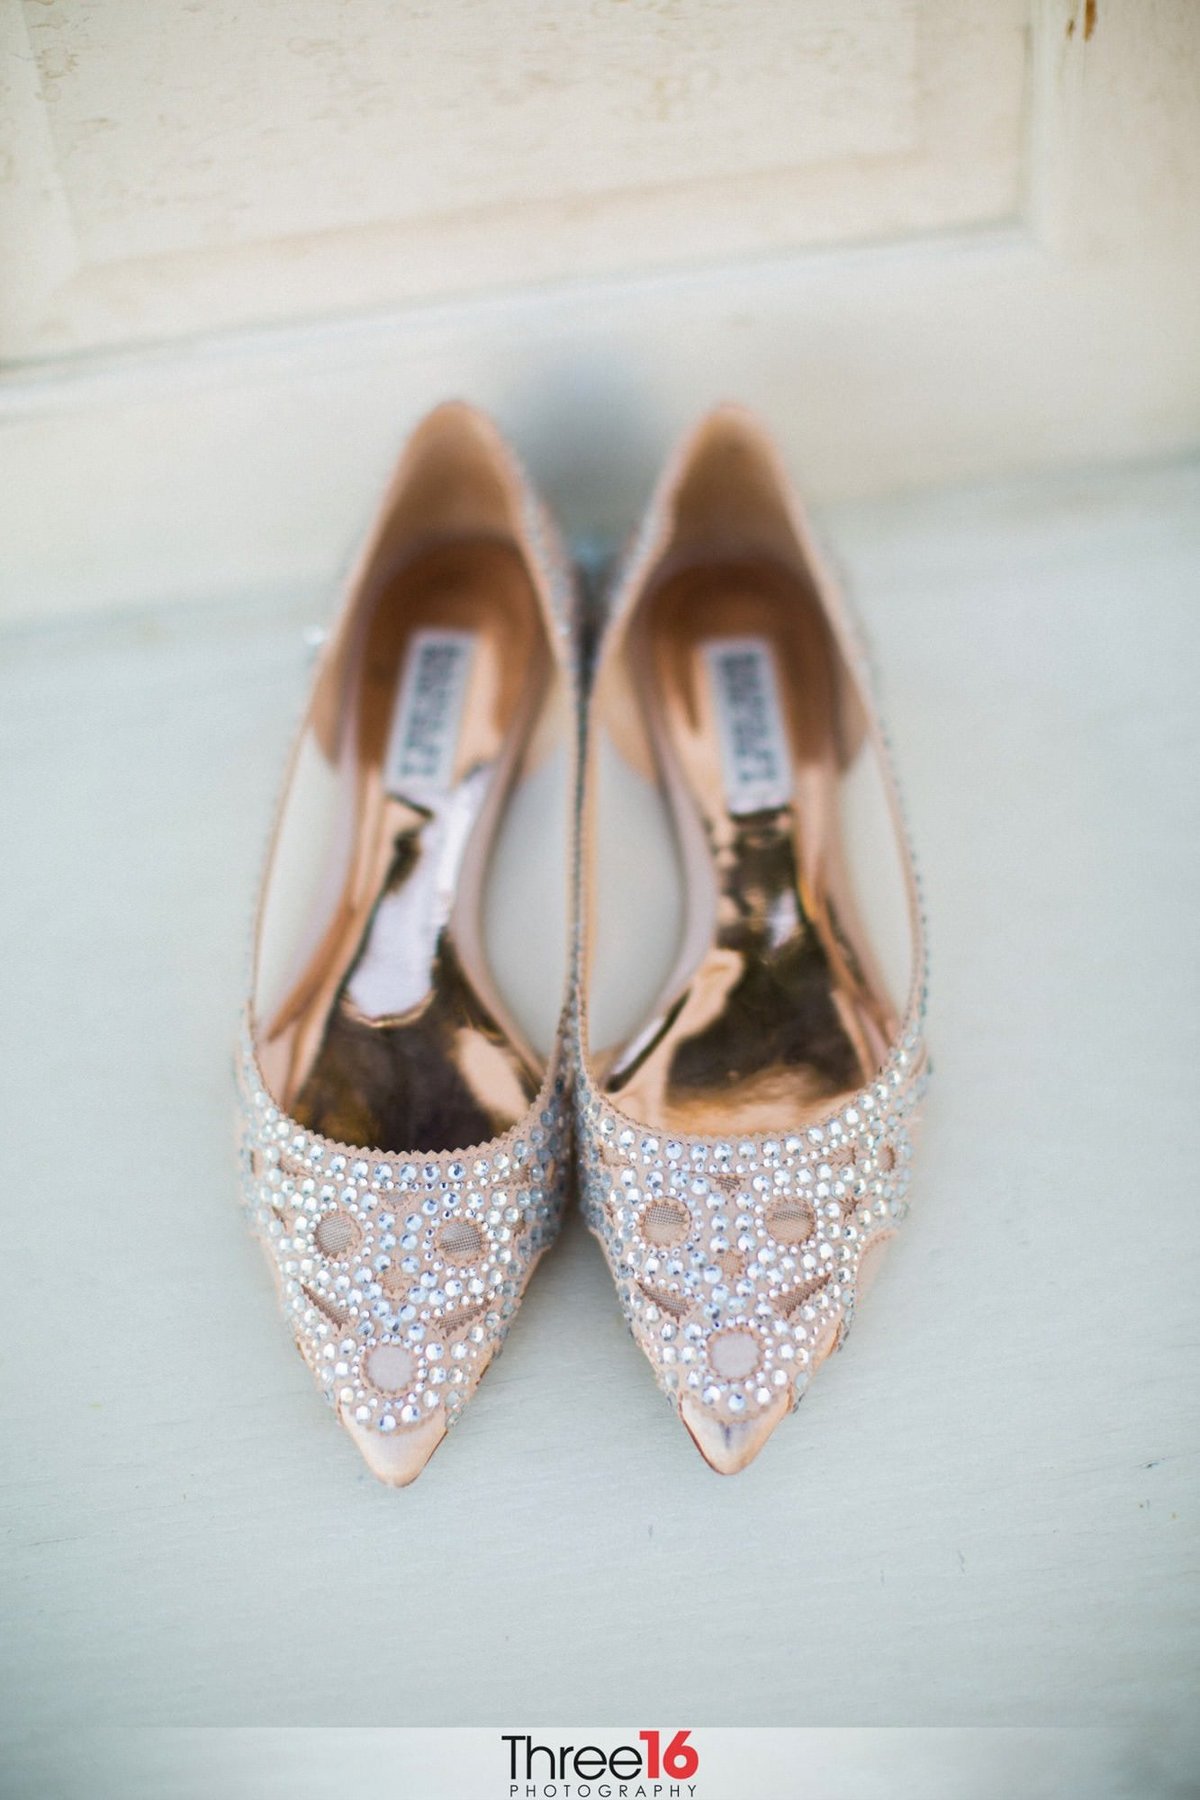 Bride's wedding day shoes prior to the ceremony